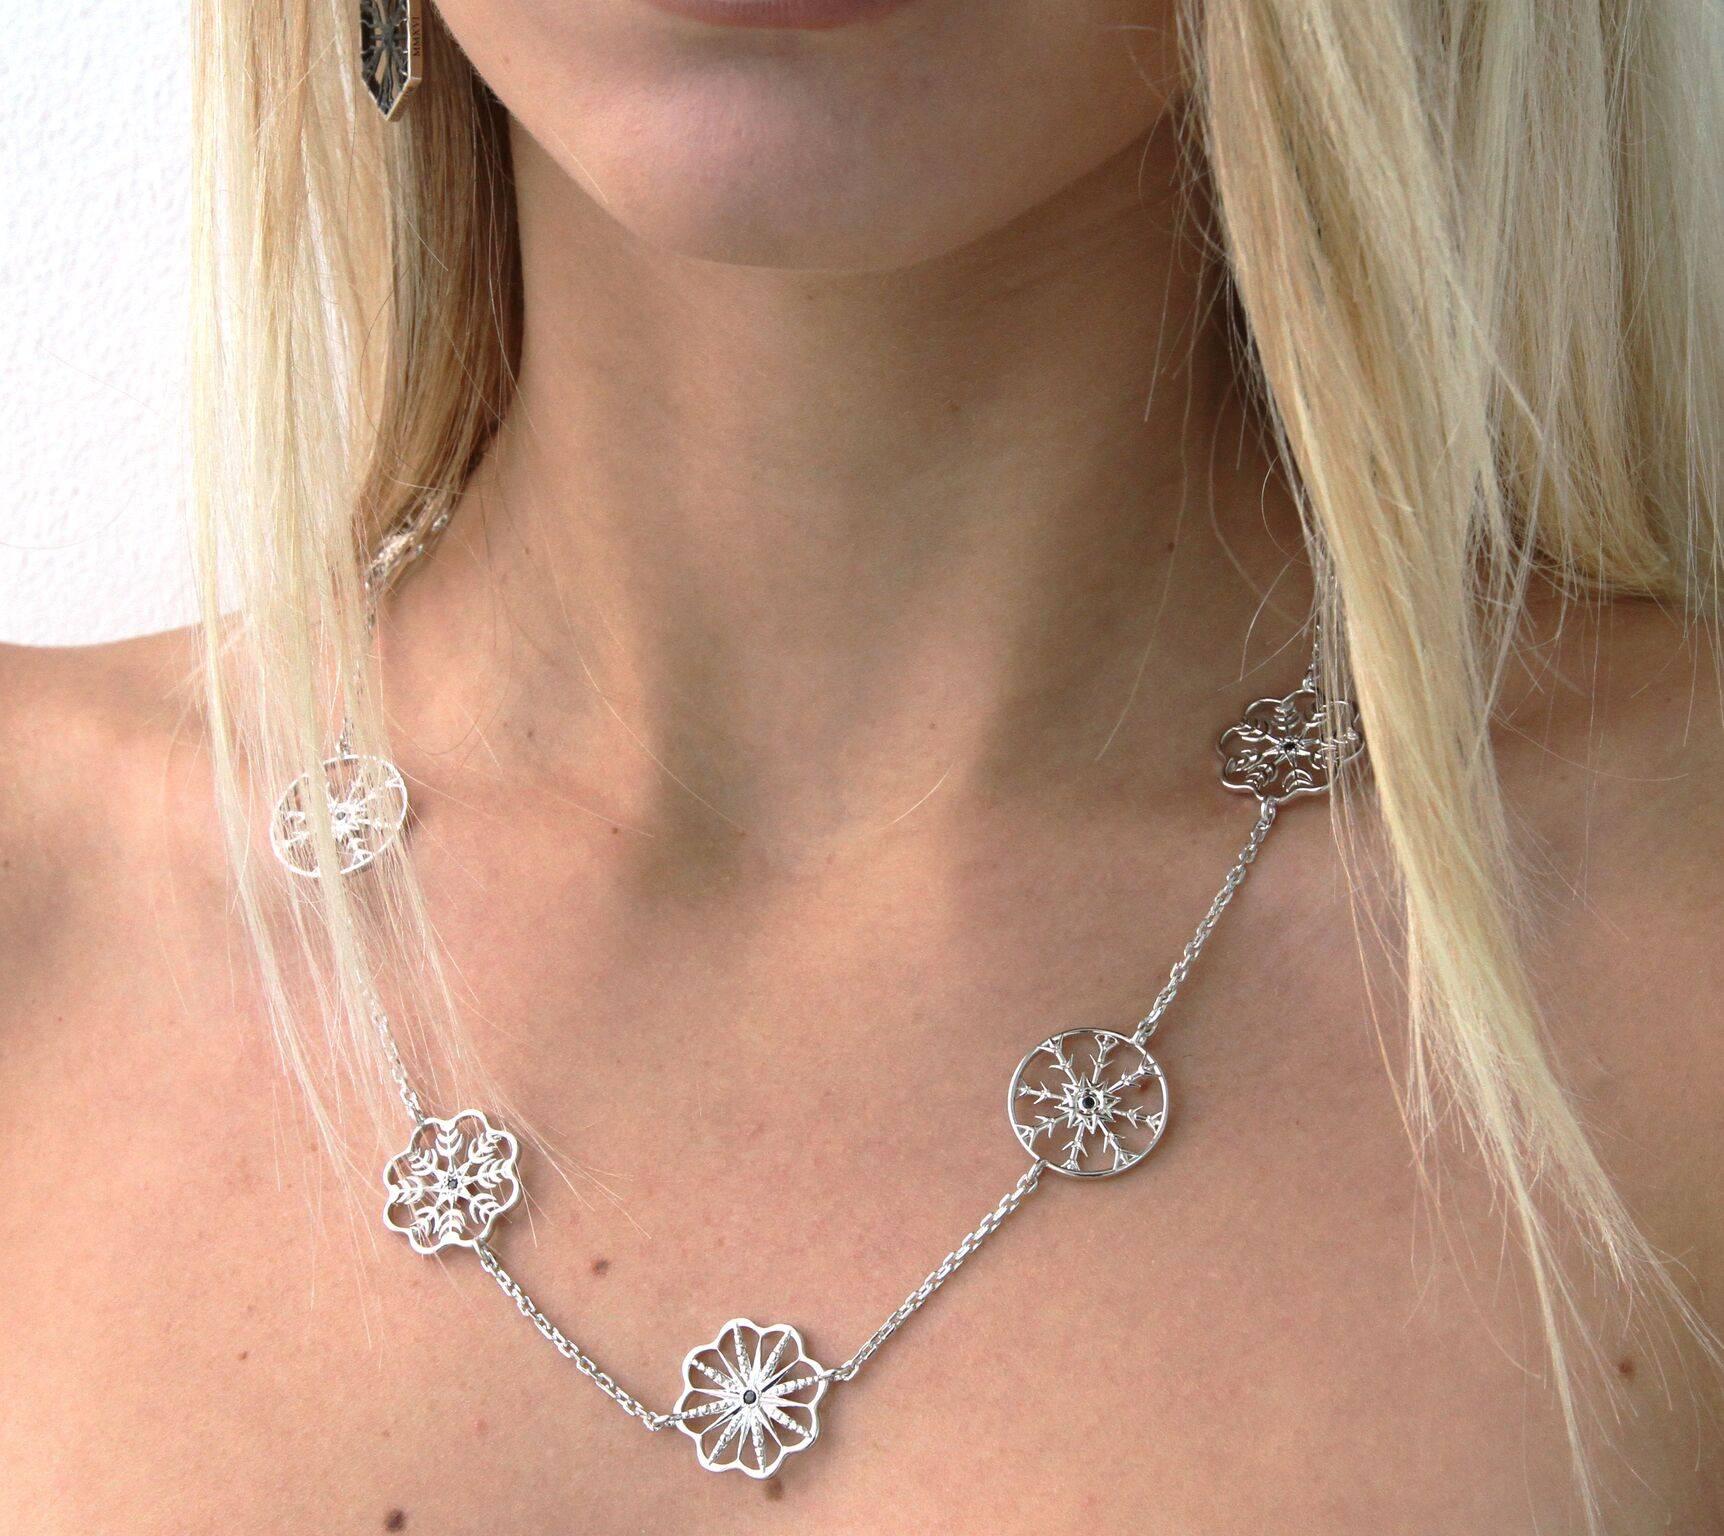 This elegant Snow Queen Long Necklace is a fusion of delicate beauty and inner strength. The necklace is made of sterling silver and features six black sapphires. This piece connects the wearer's life and the shape of a snowflake. Lives are